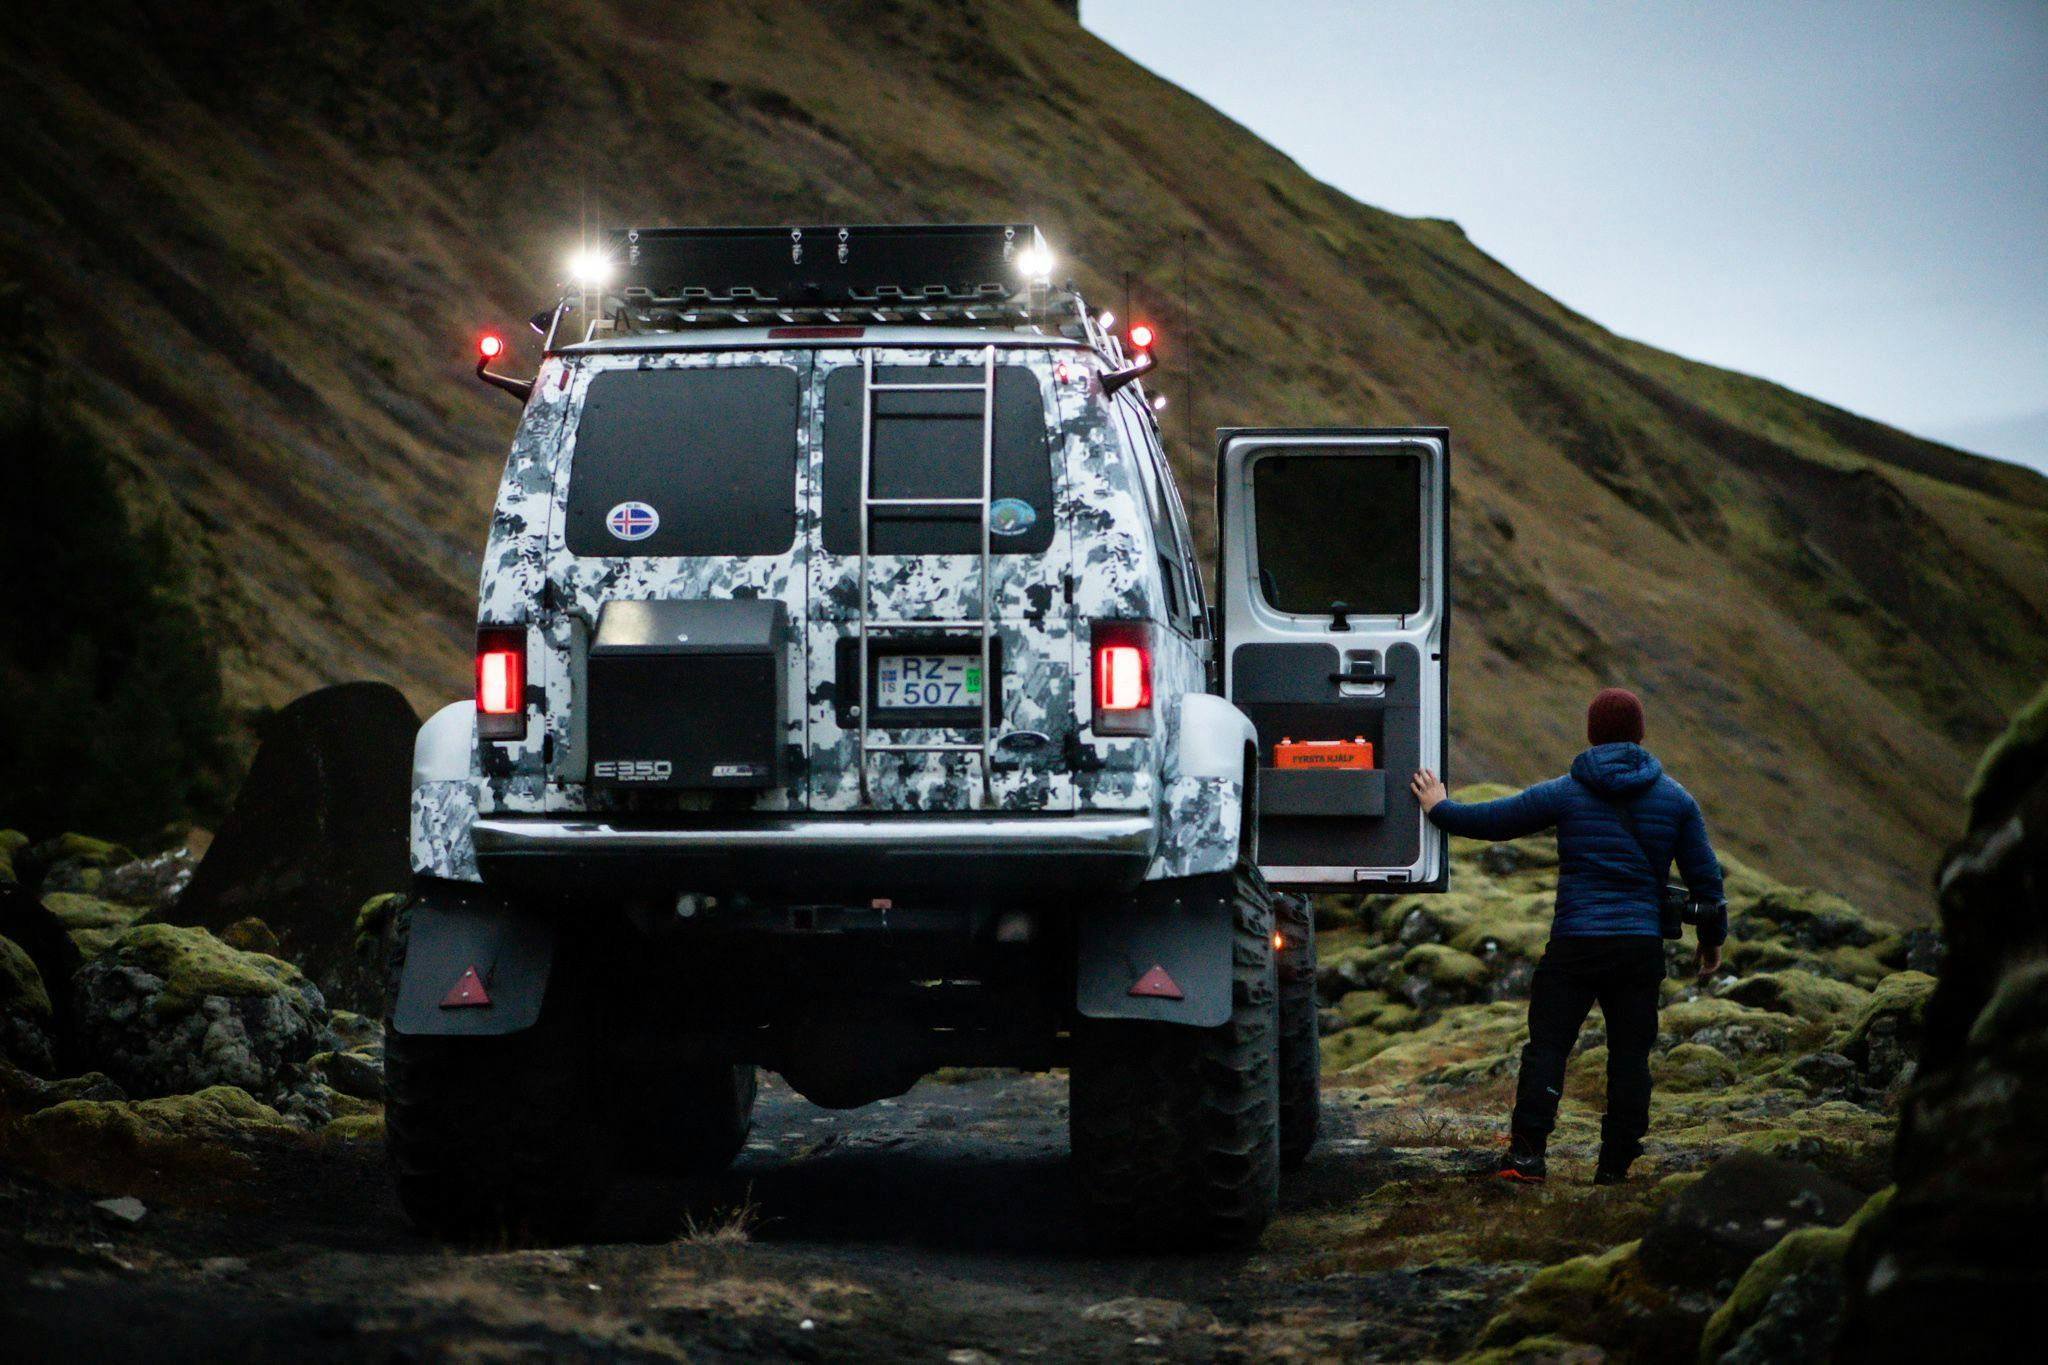 Embark on an Epic Journey: Exploring Thorsmork with a Super Jeep Adventure